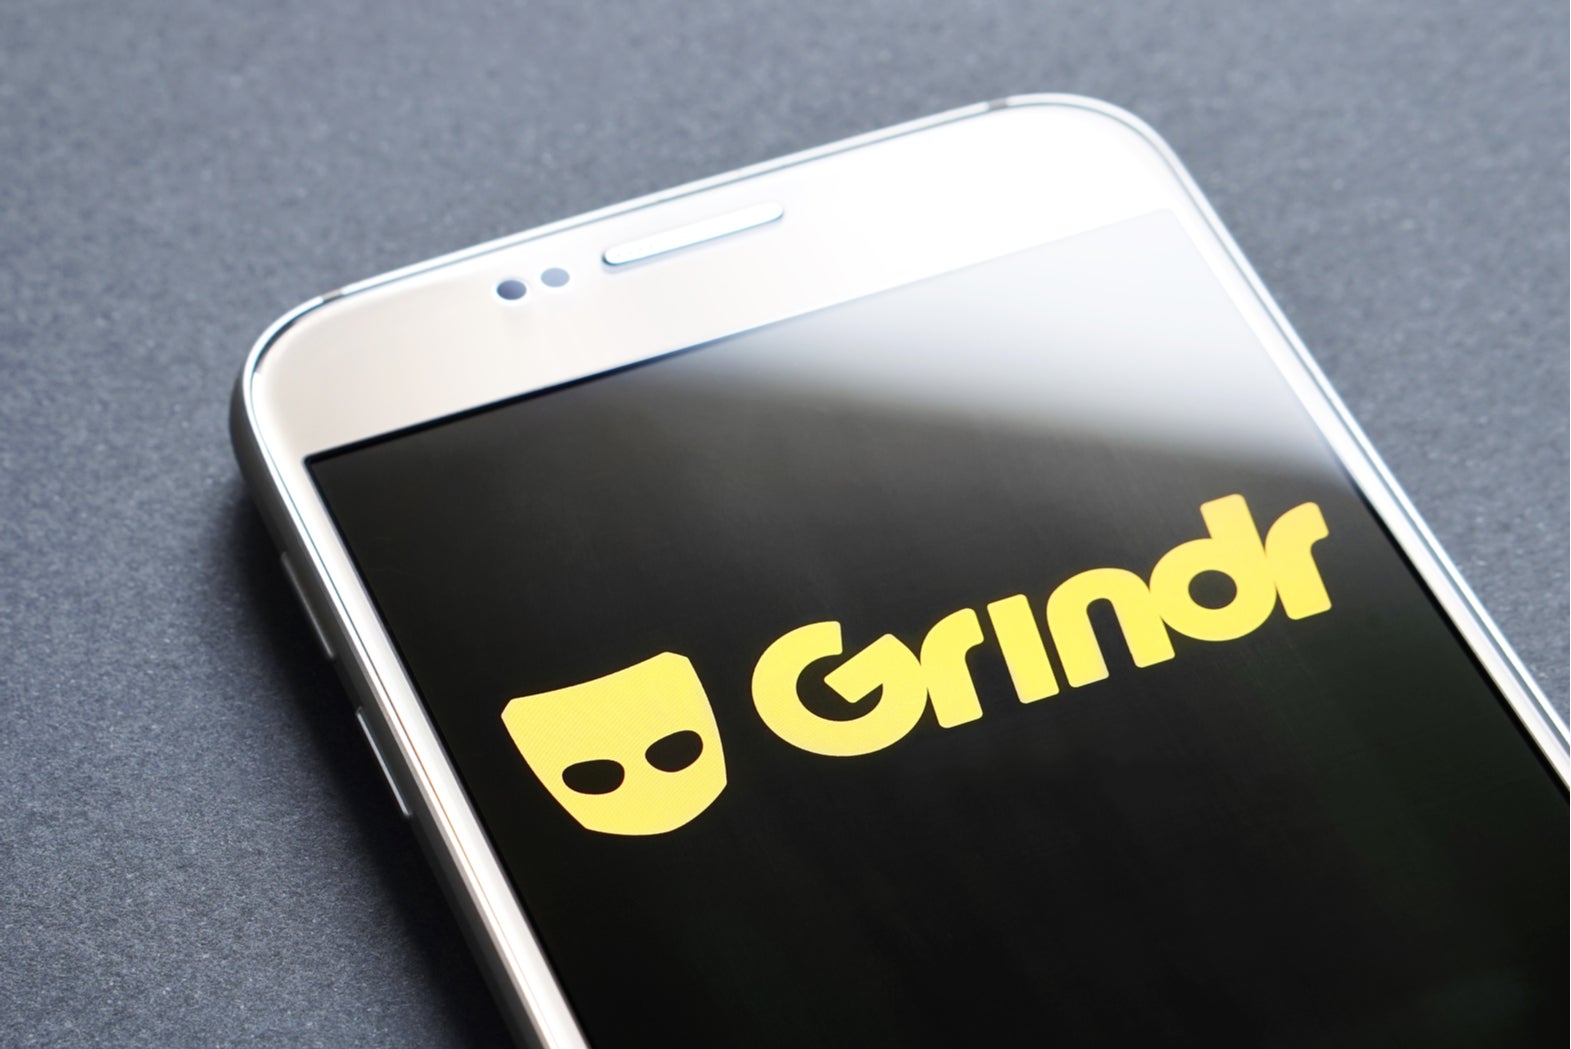 Grindr faces €10m GDPR fine over third-party data sharing